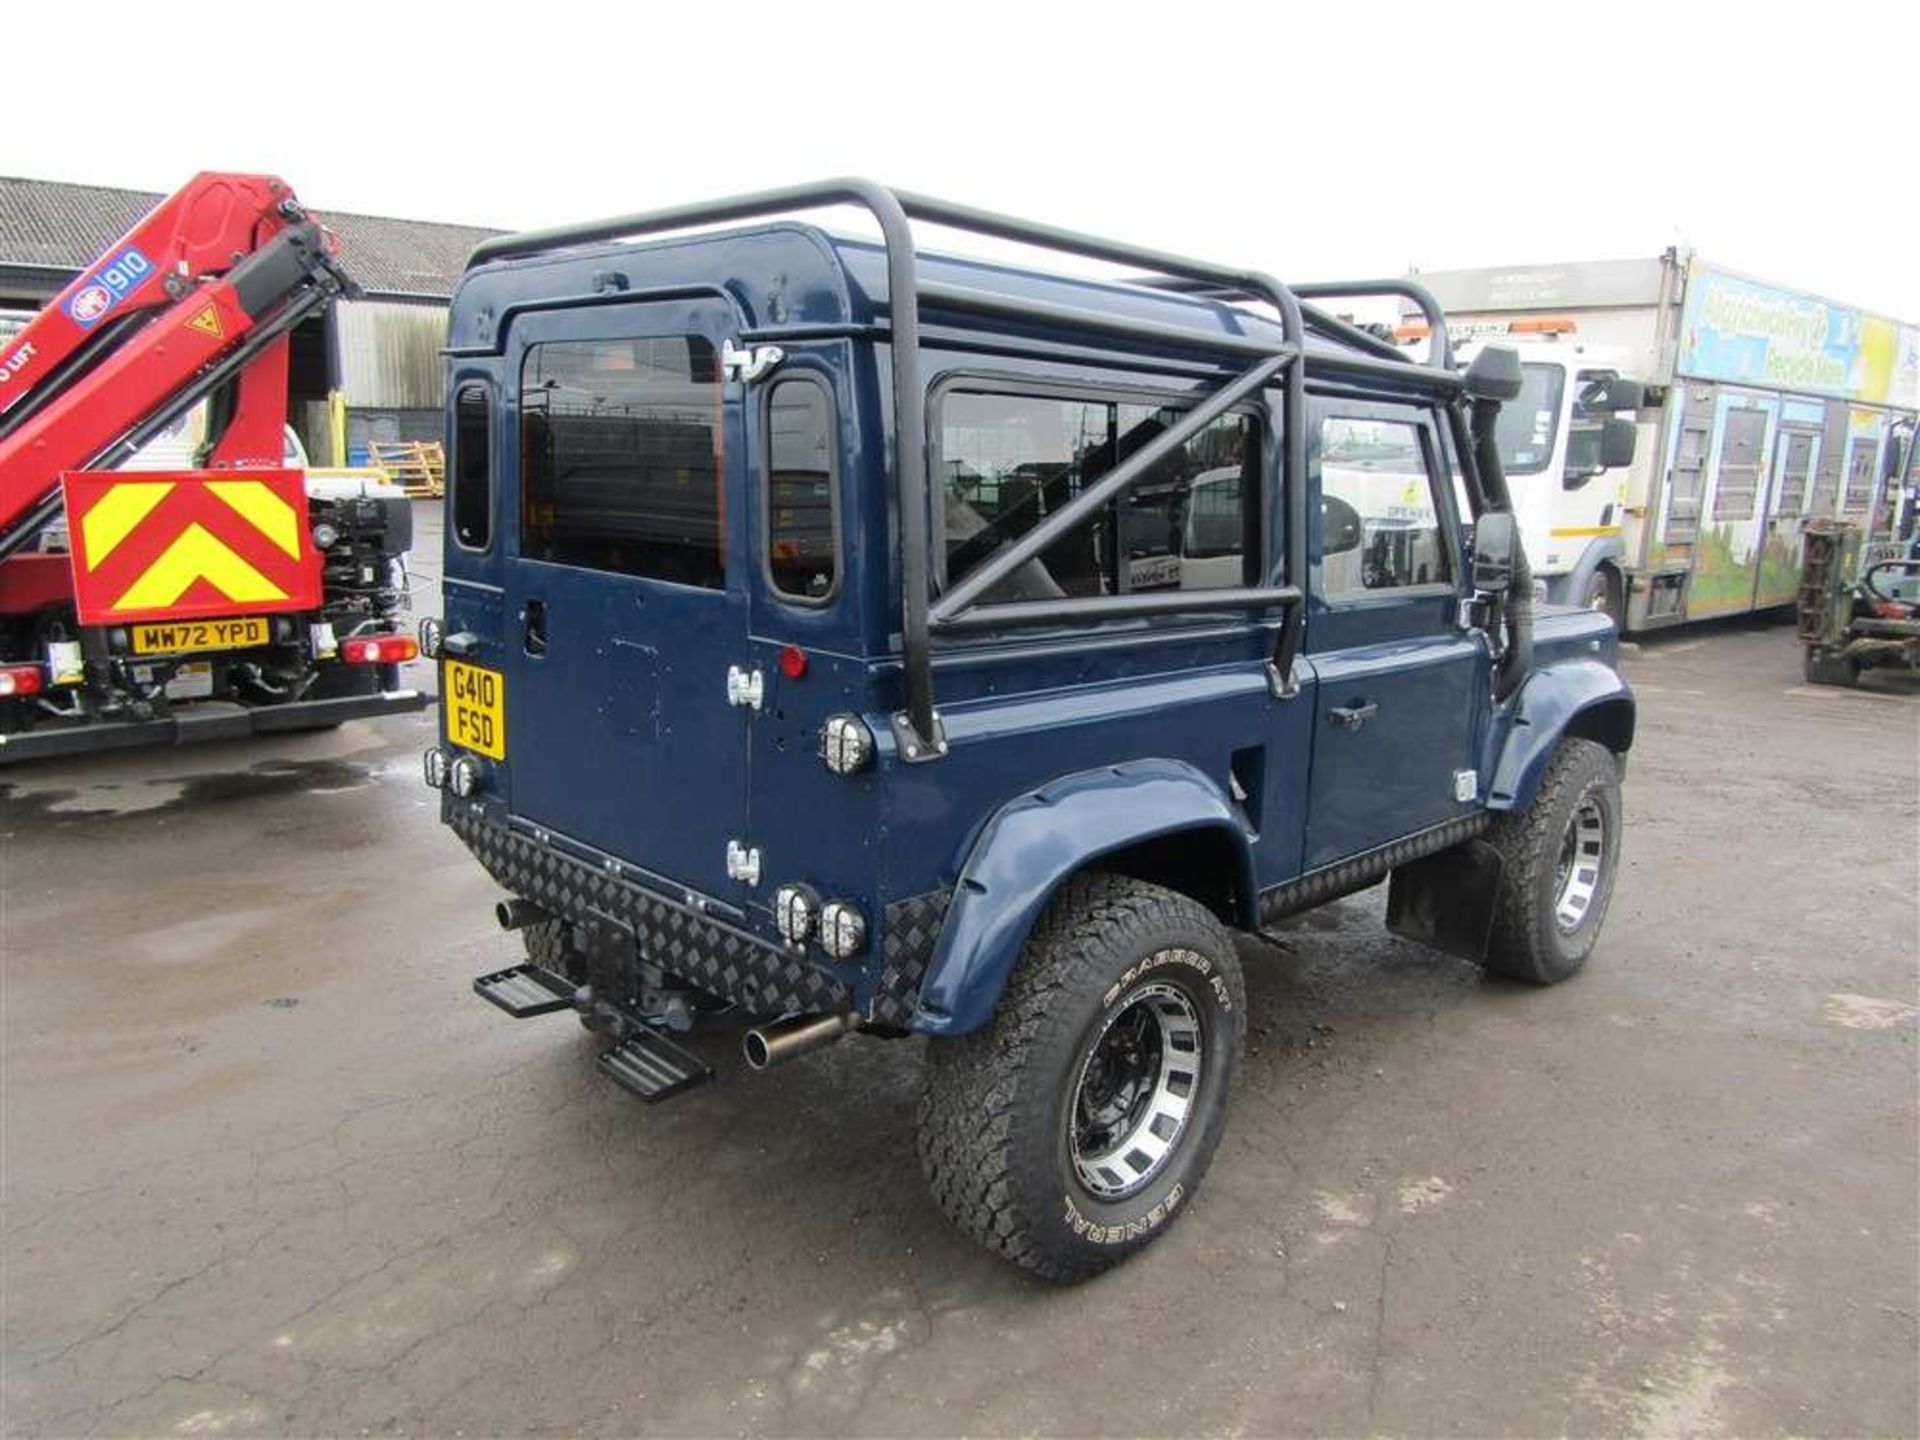 1990 G reg Landrover 90 4C SW DT - SEE ADDITIONAL INFO FOR A LIST OF EXTRAS ON THIS VEHICLE !!! - Image 4 of 6